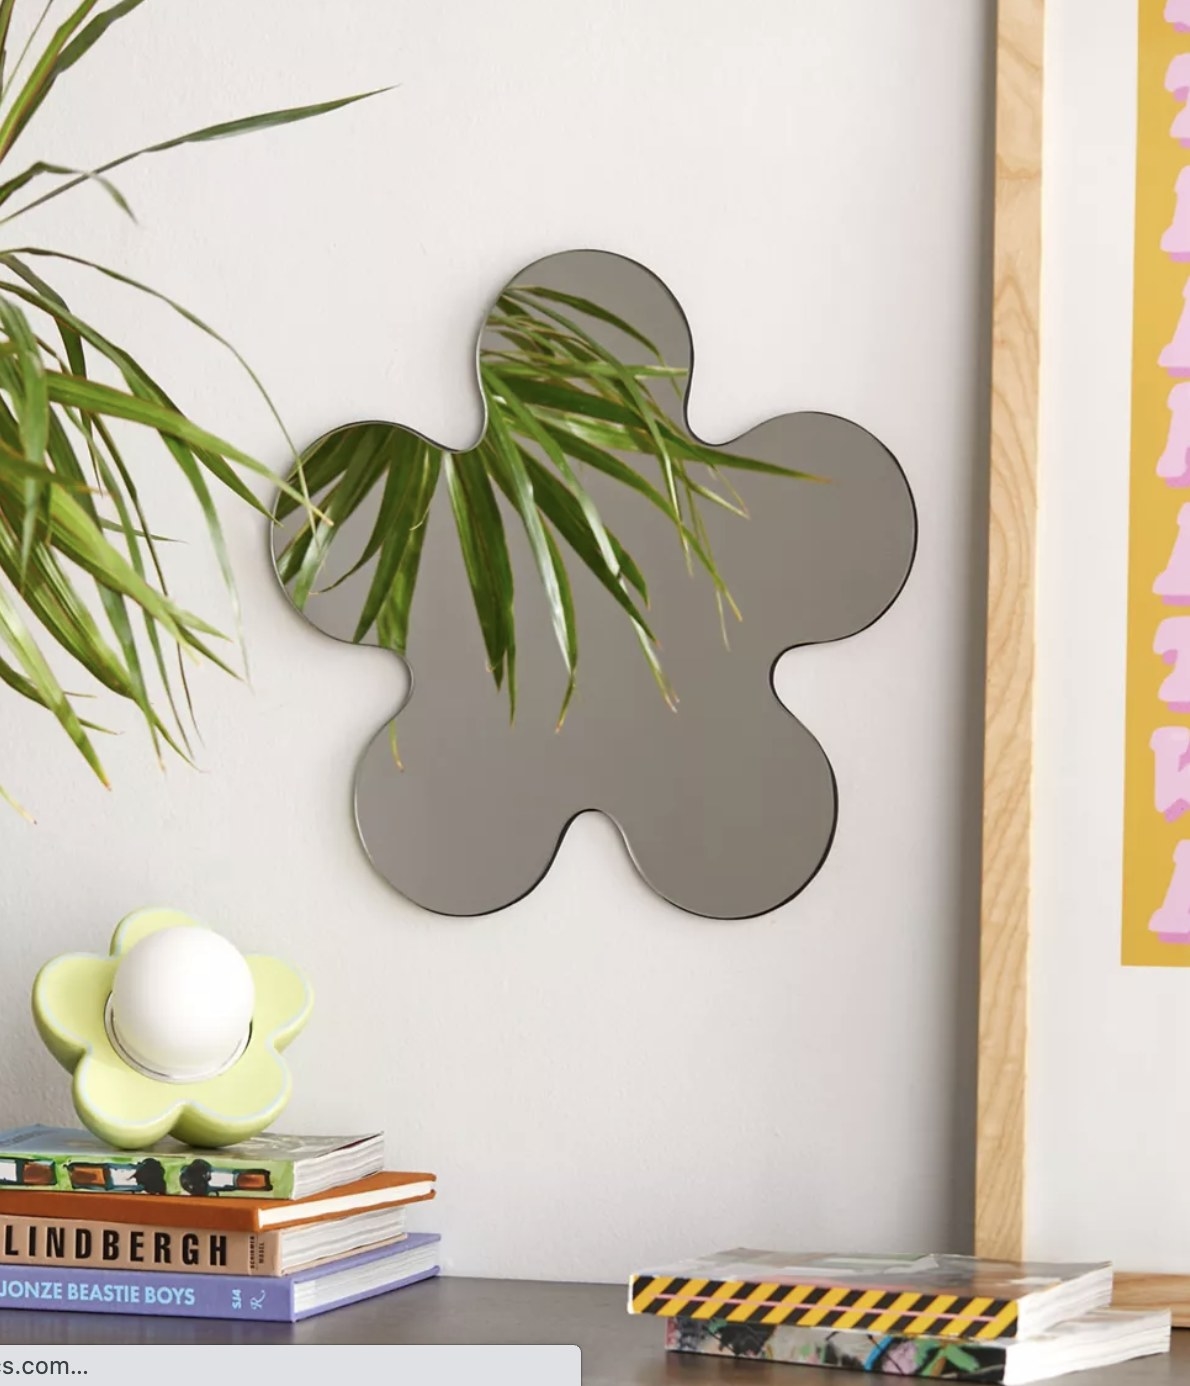 A  flower shaped mirror hung next to a flower shaped lamp